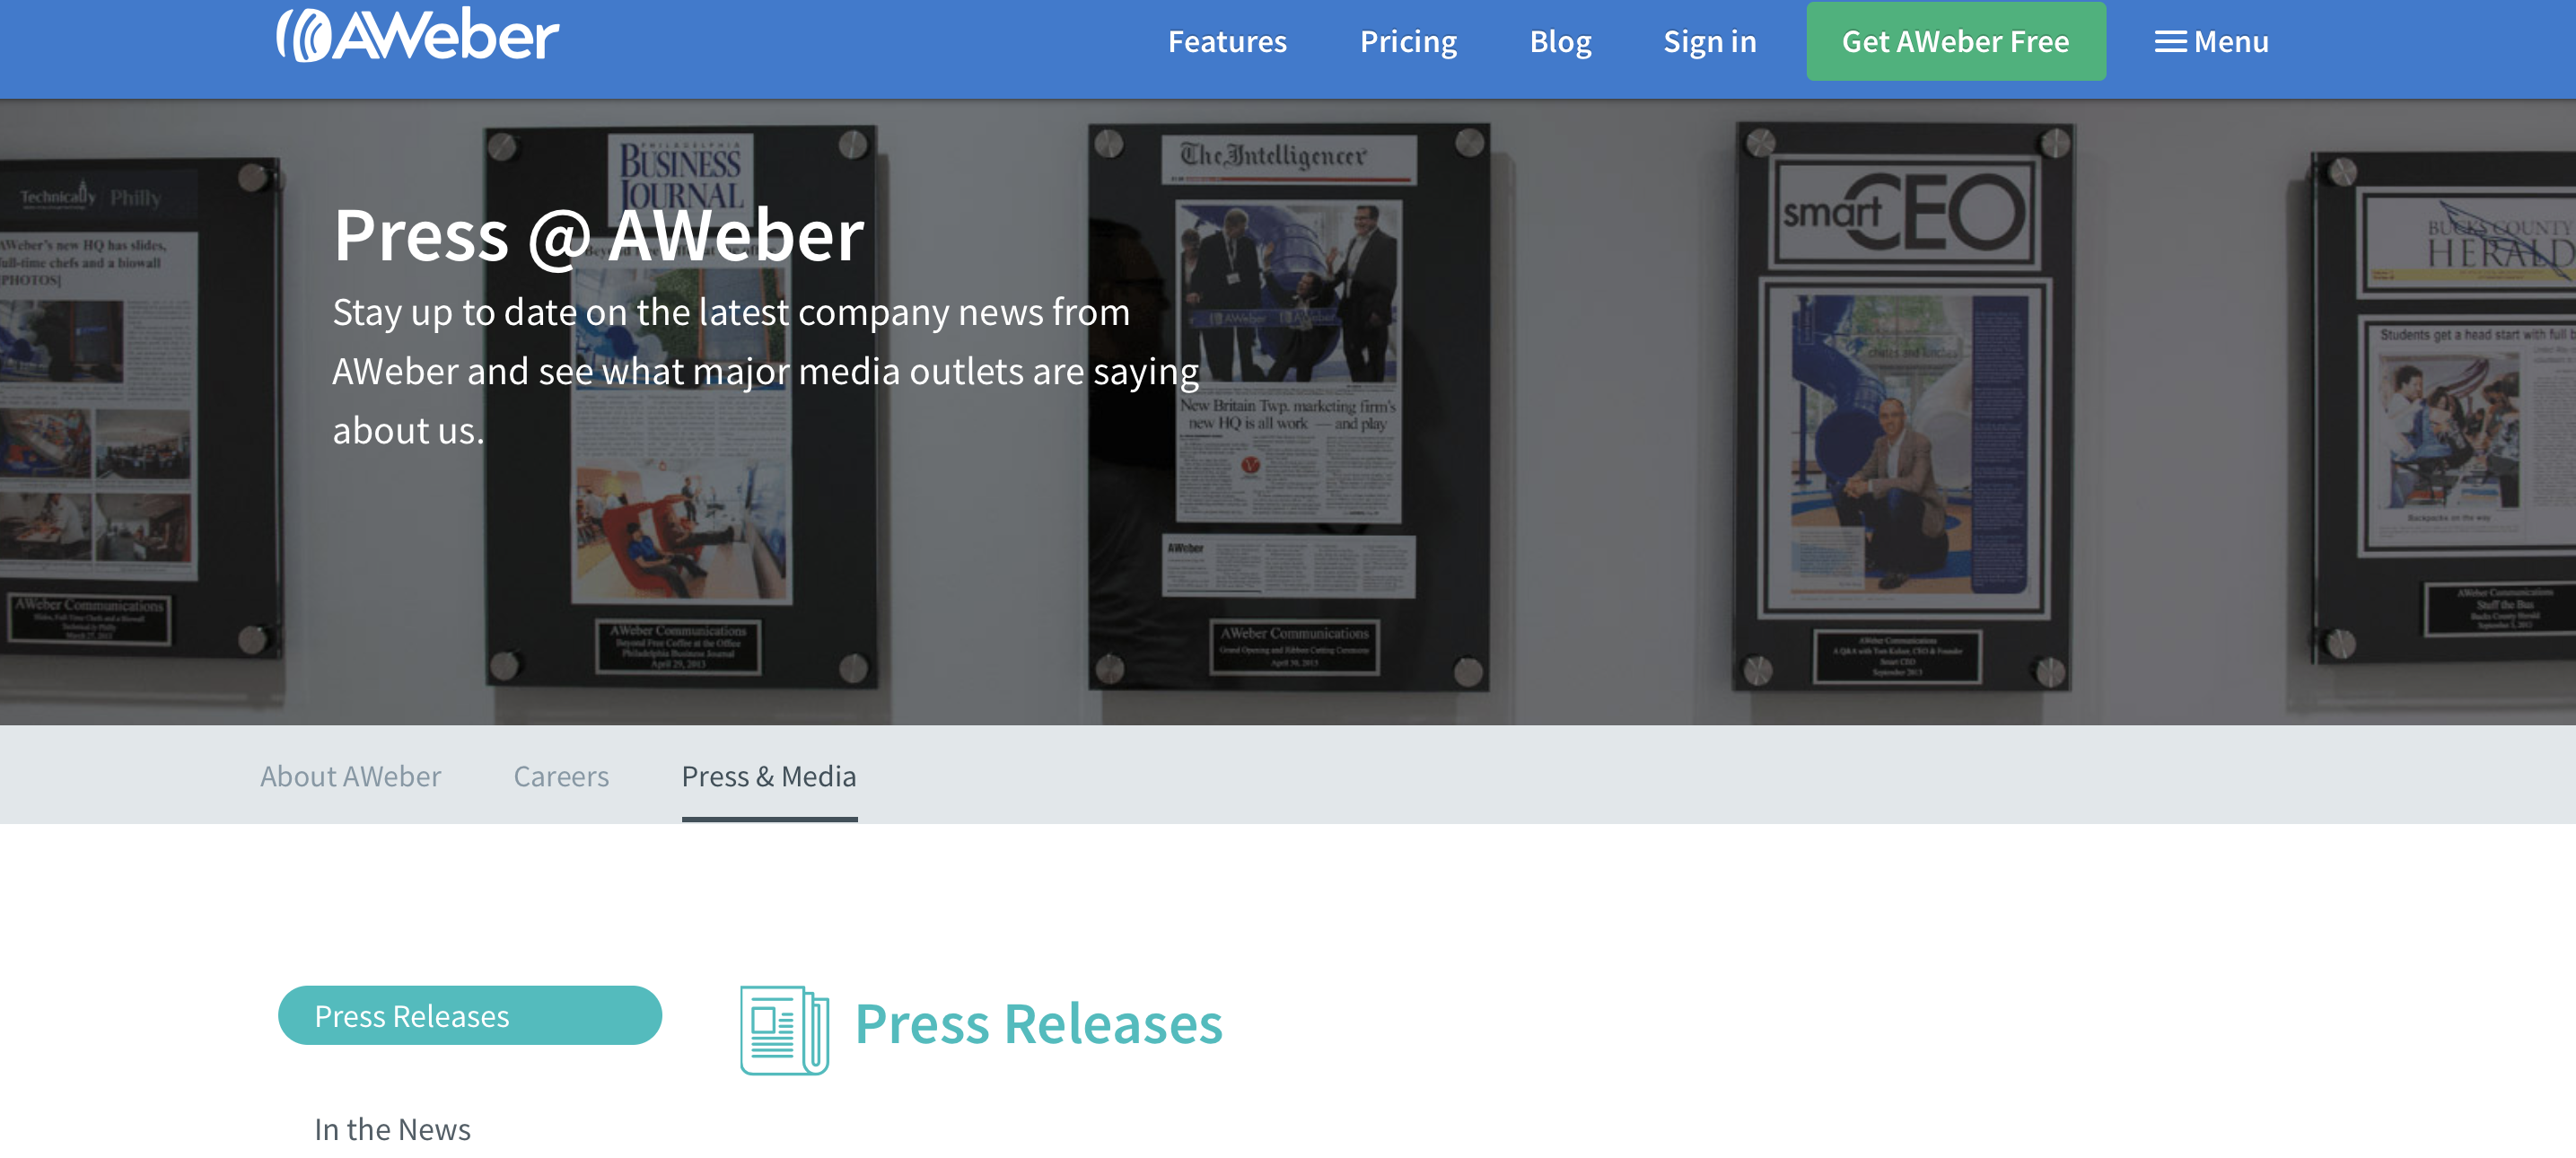 AWeber Press Release page hero section screenshot